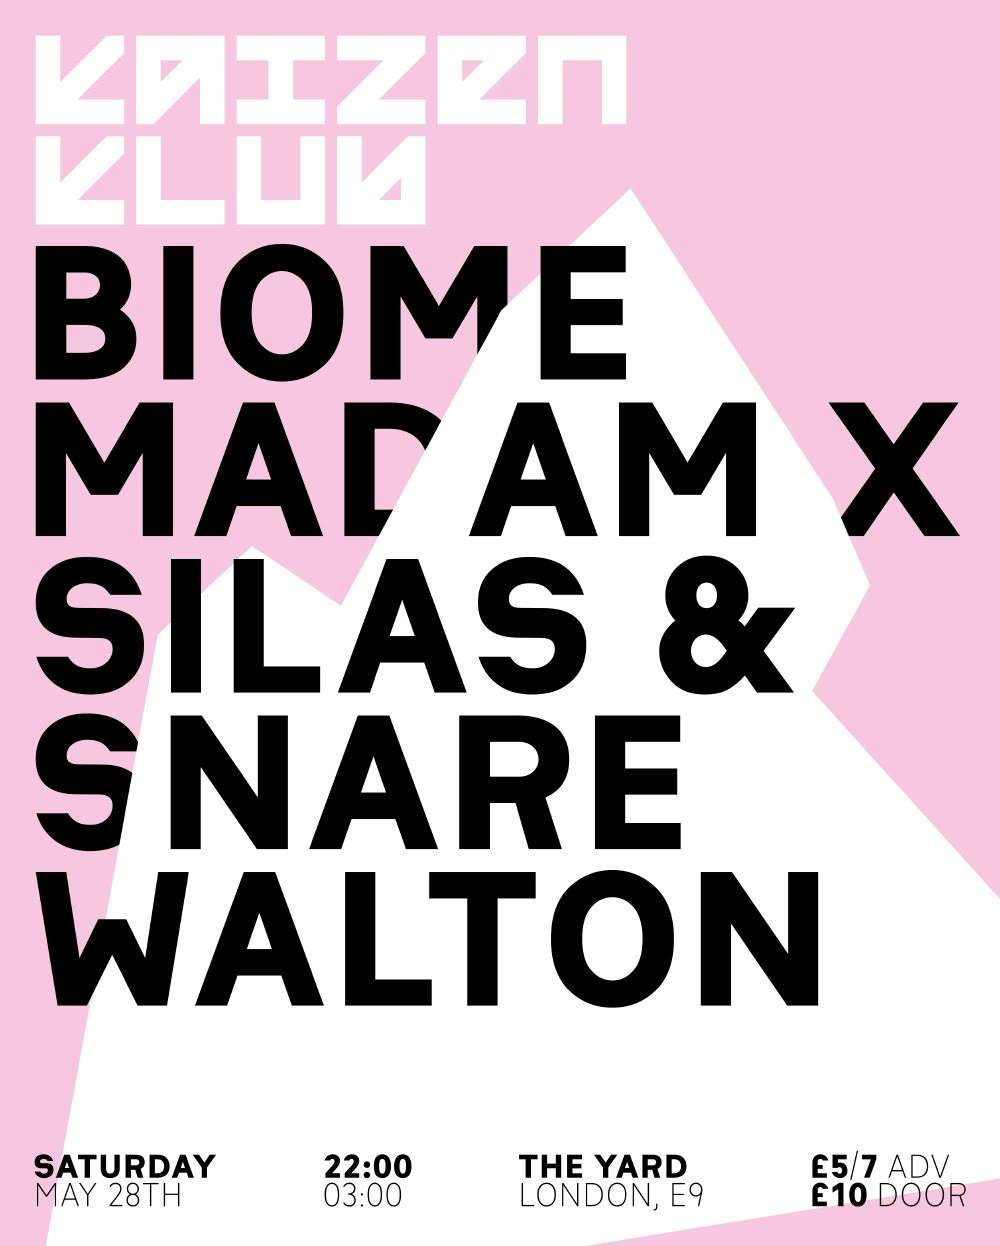 Kaizen Klub with Biome, Madam X, Walton and Silas & Snare - フライヤー表